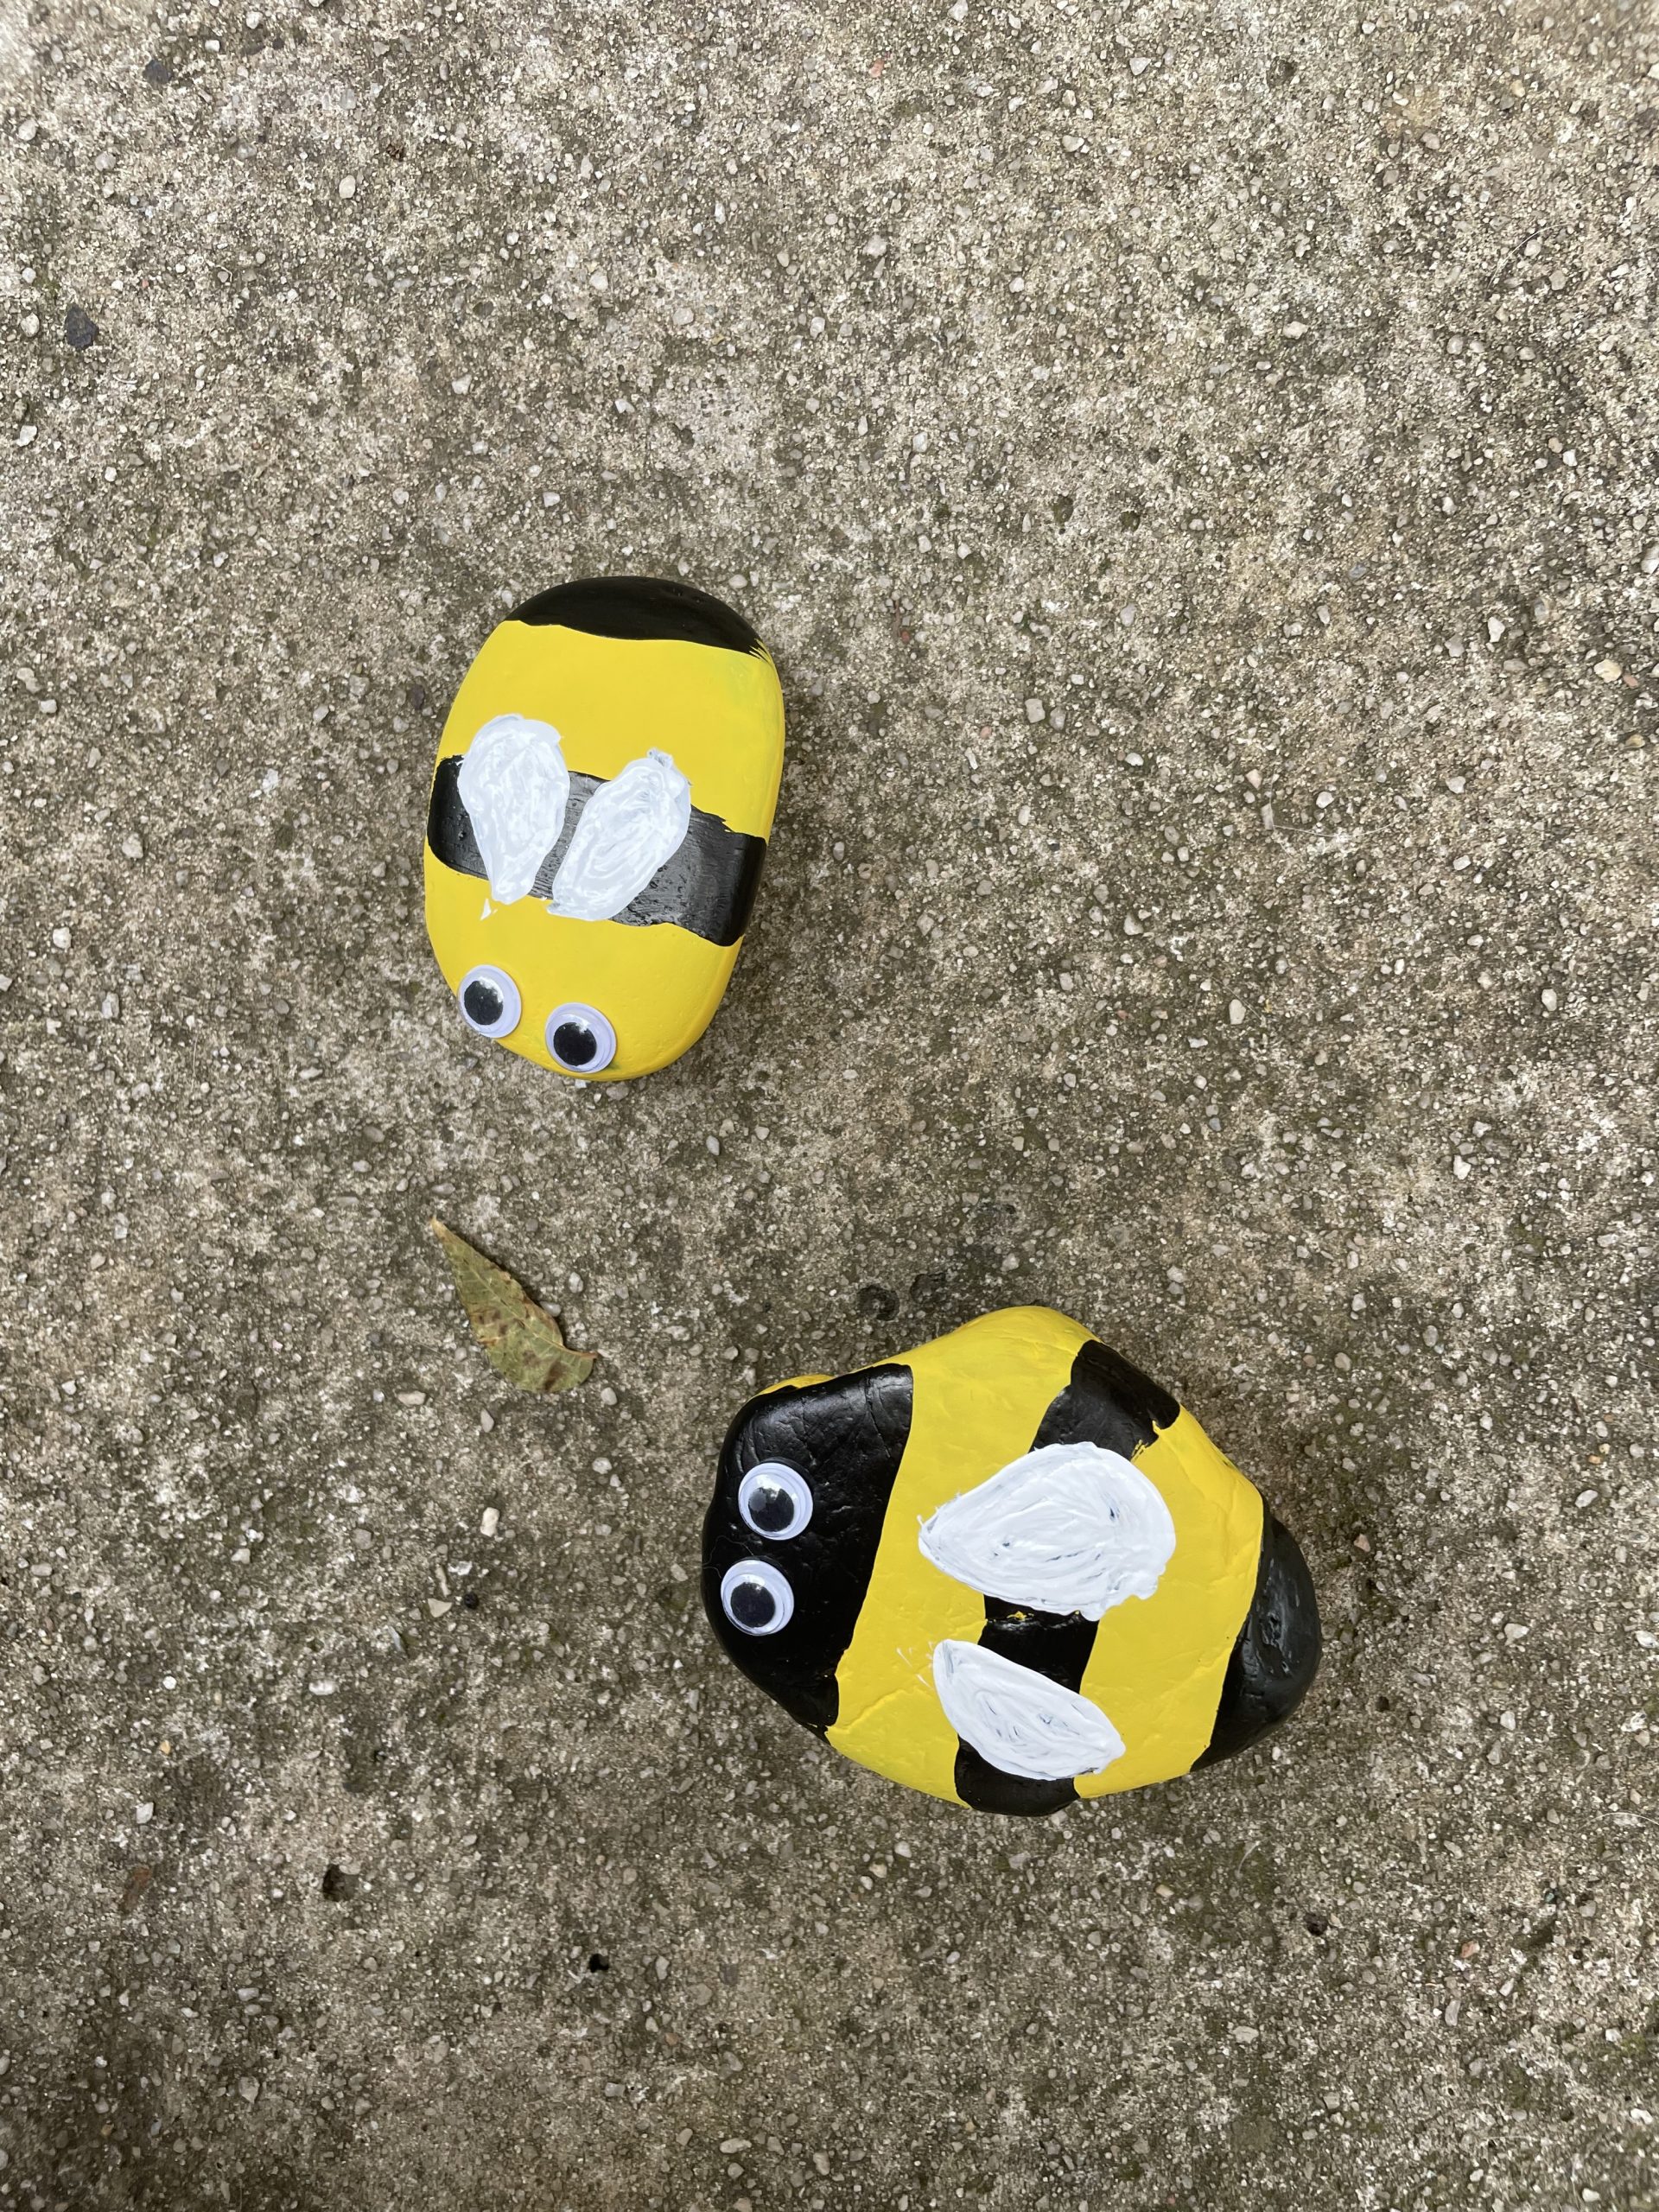 Two bees painted like rocks